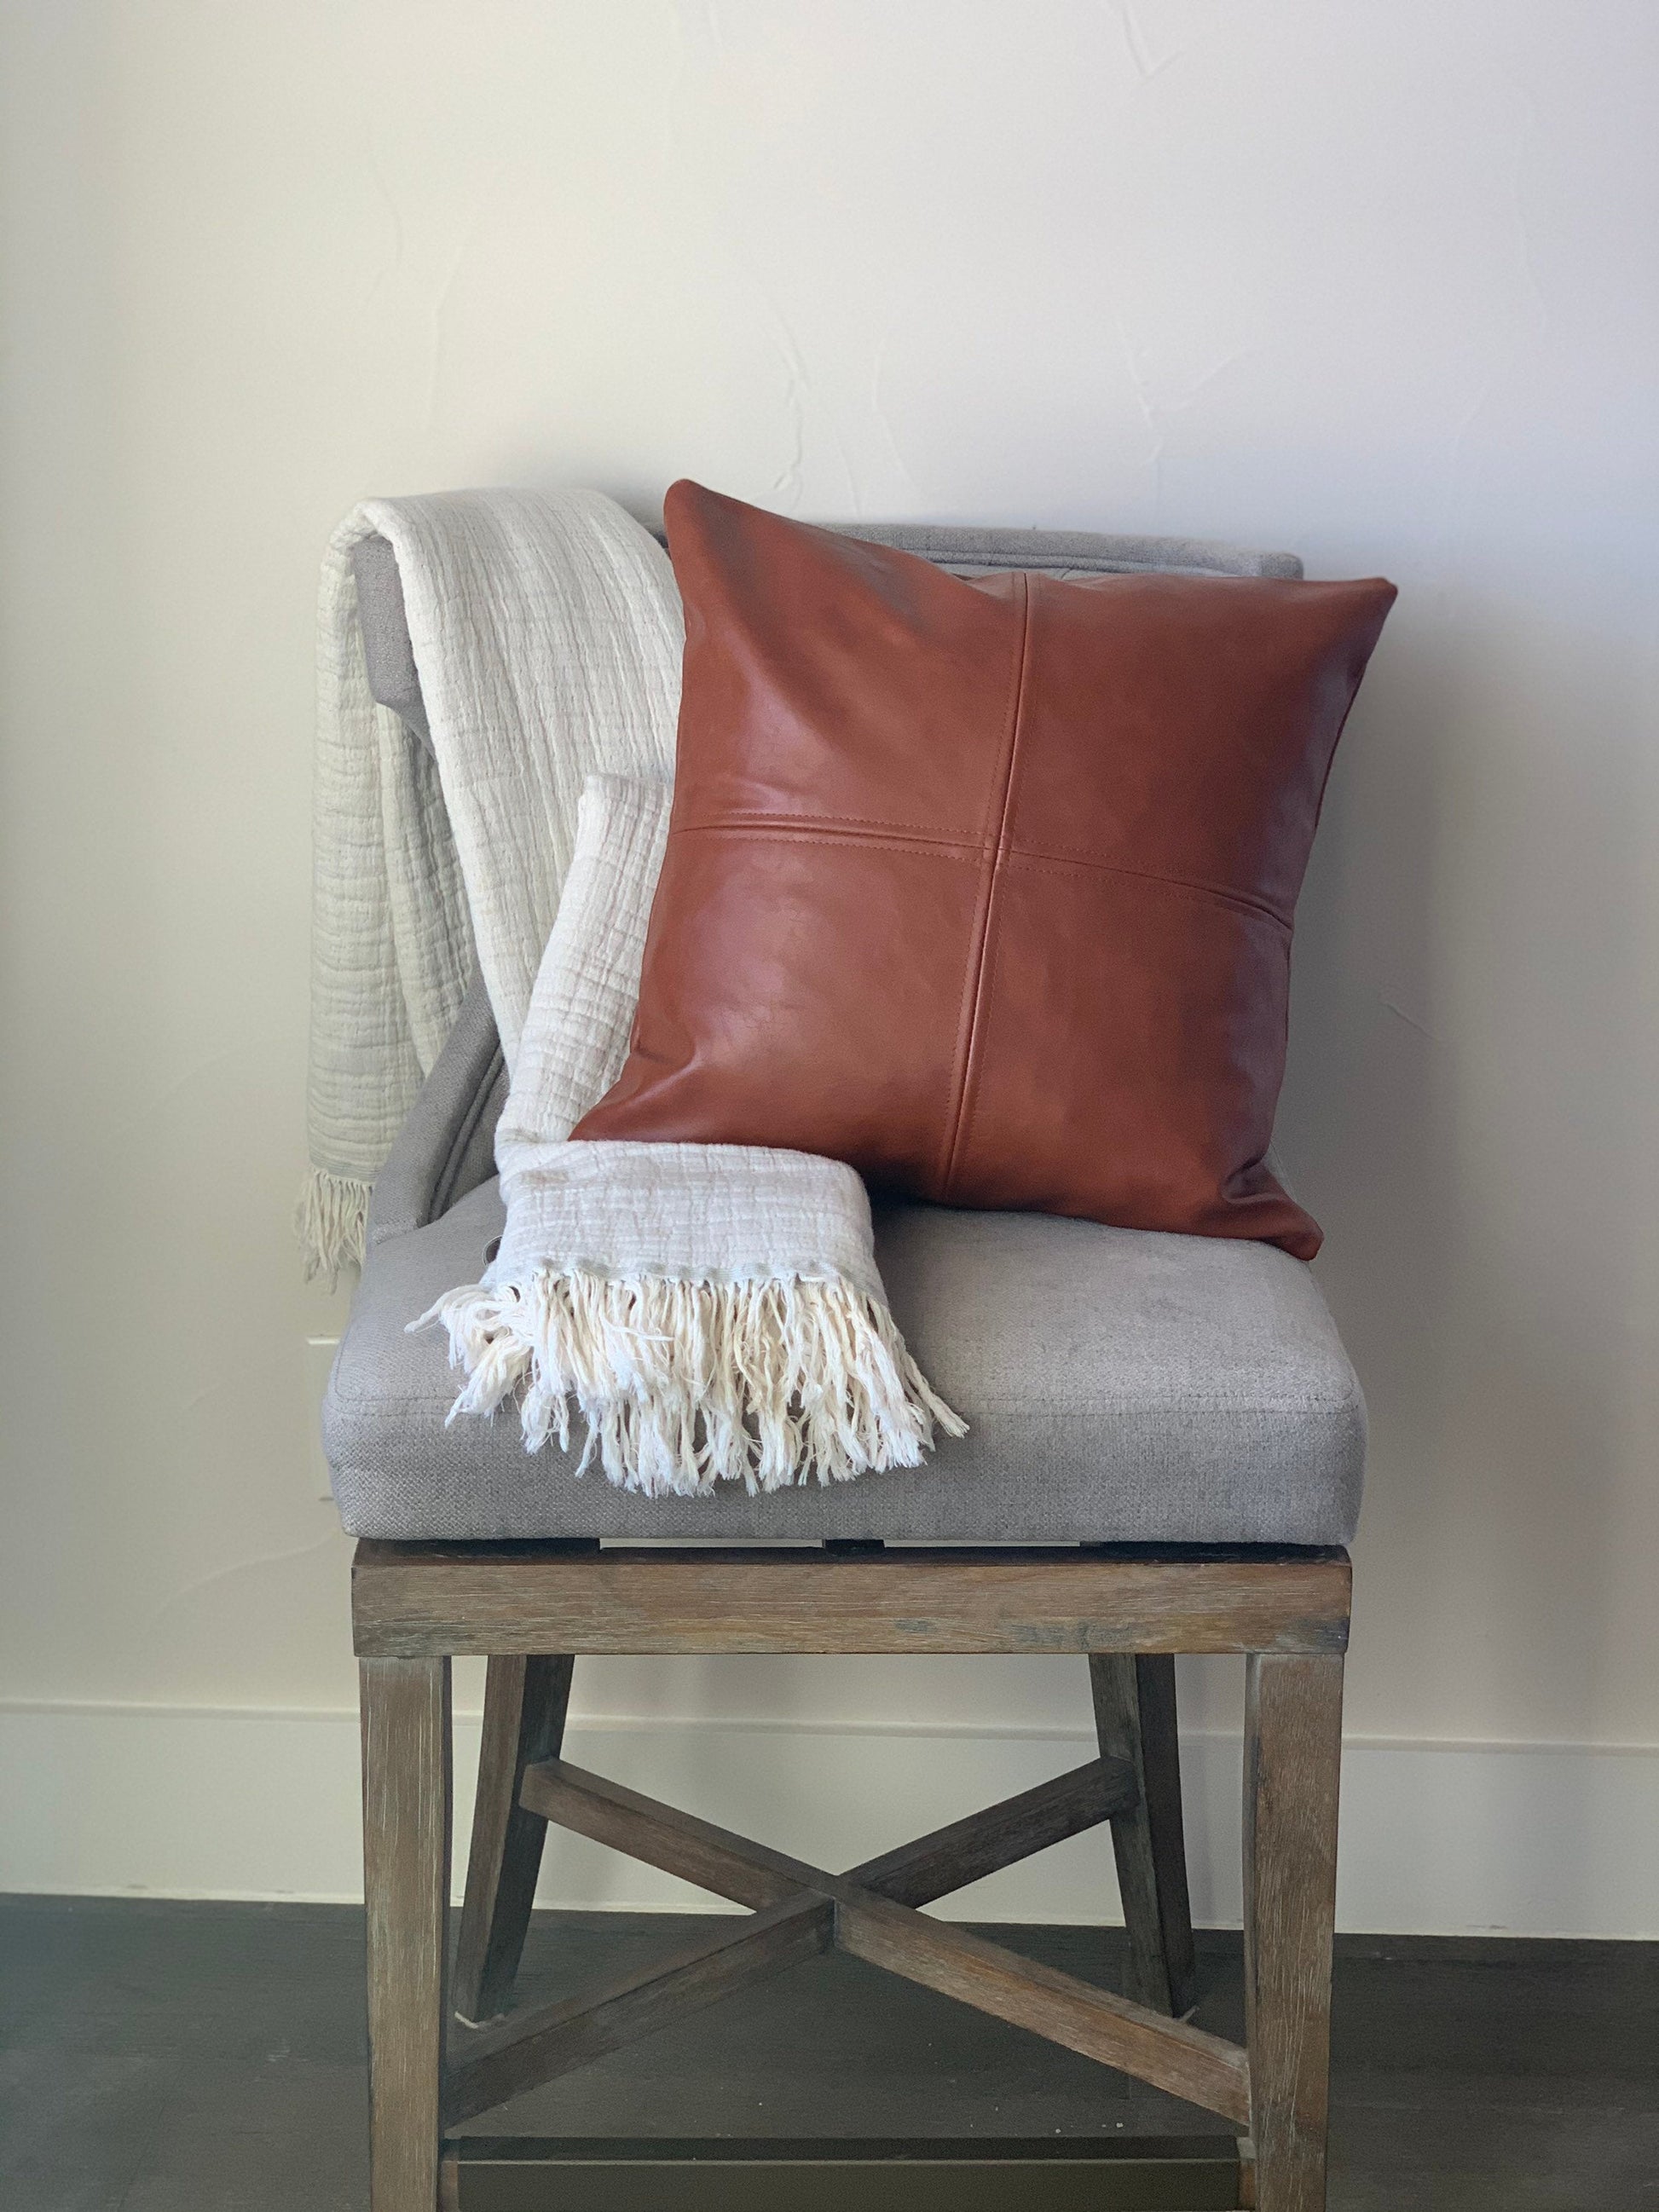 A gray chair with a large brown Magenta Charlie vegan leather pillow cover and a draped white throw blanket with fringe detailing.